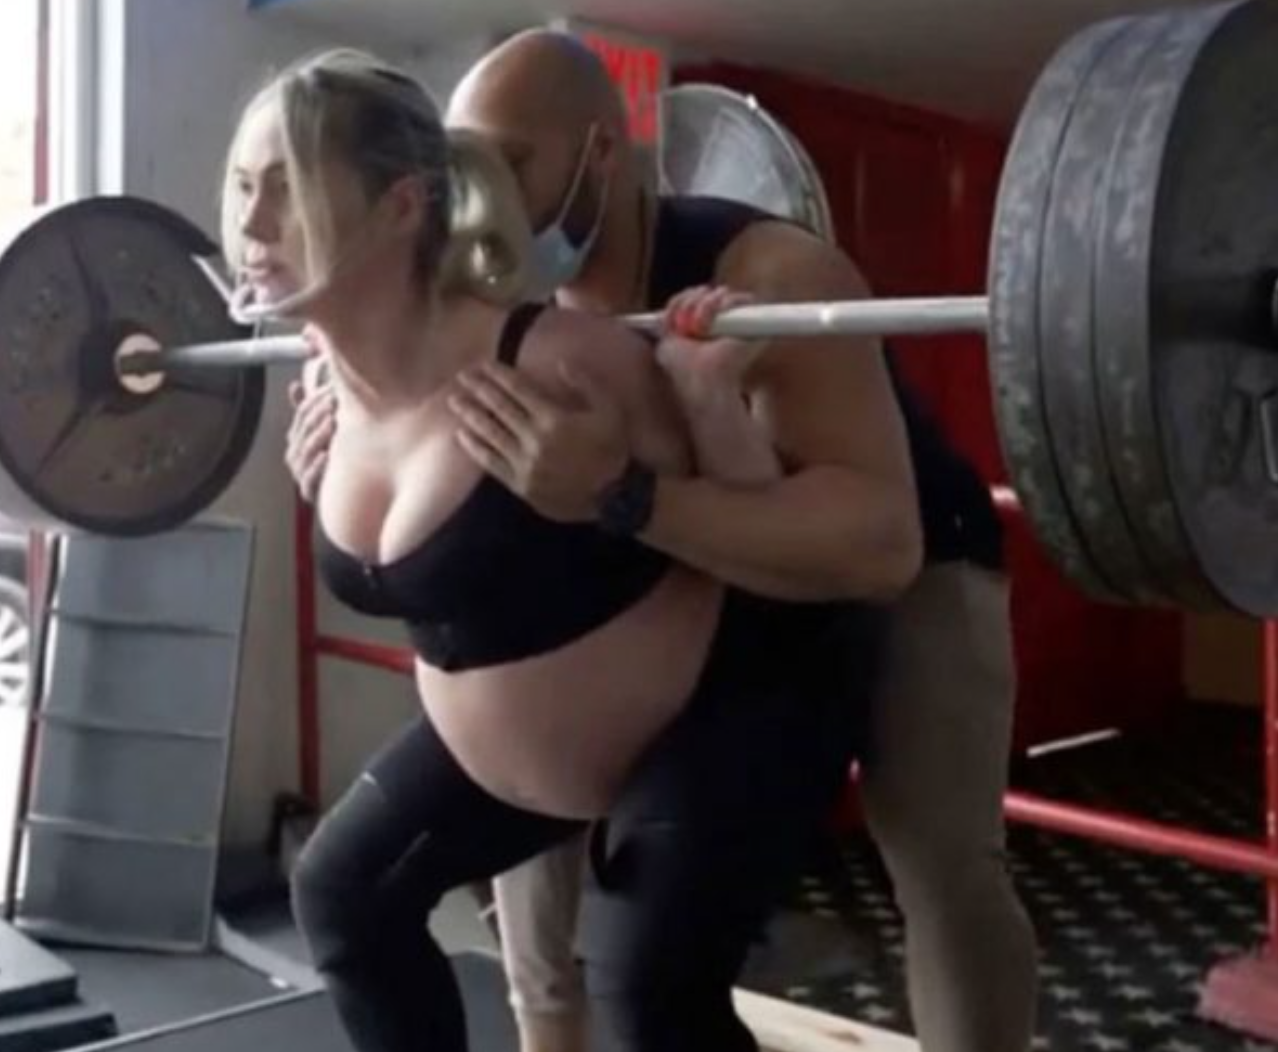 Pregnant Woman Posts Photo Lifting 315 Pounds, And the Jealous Instagram Trolls Come Crawling